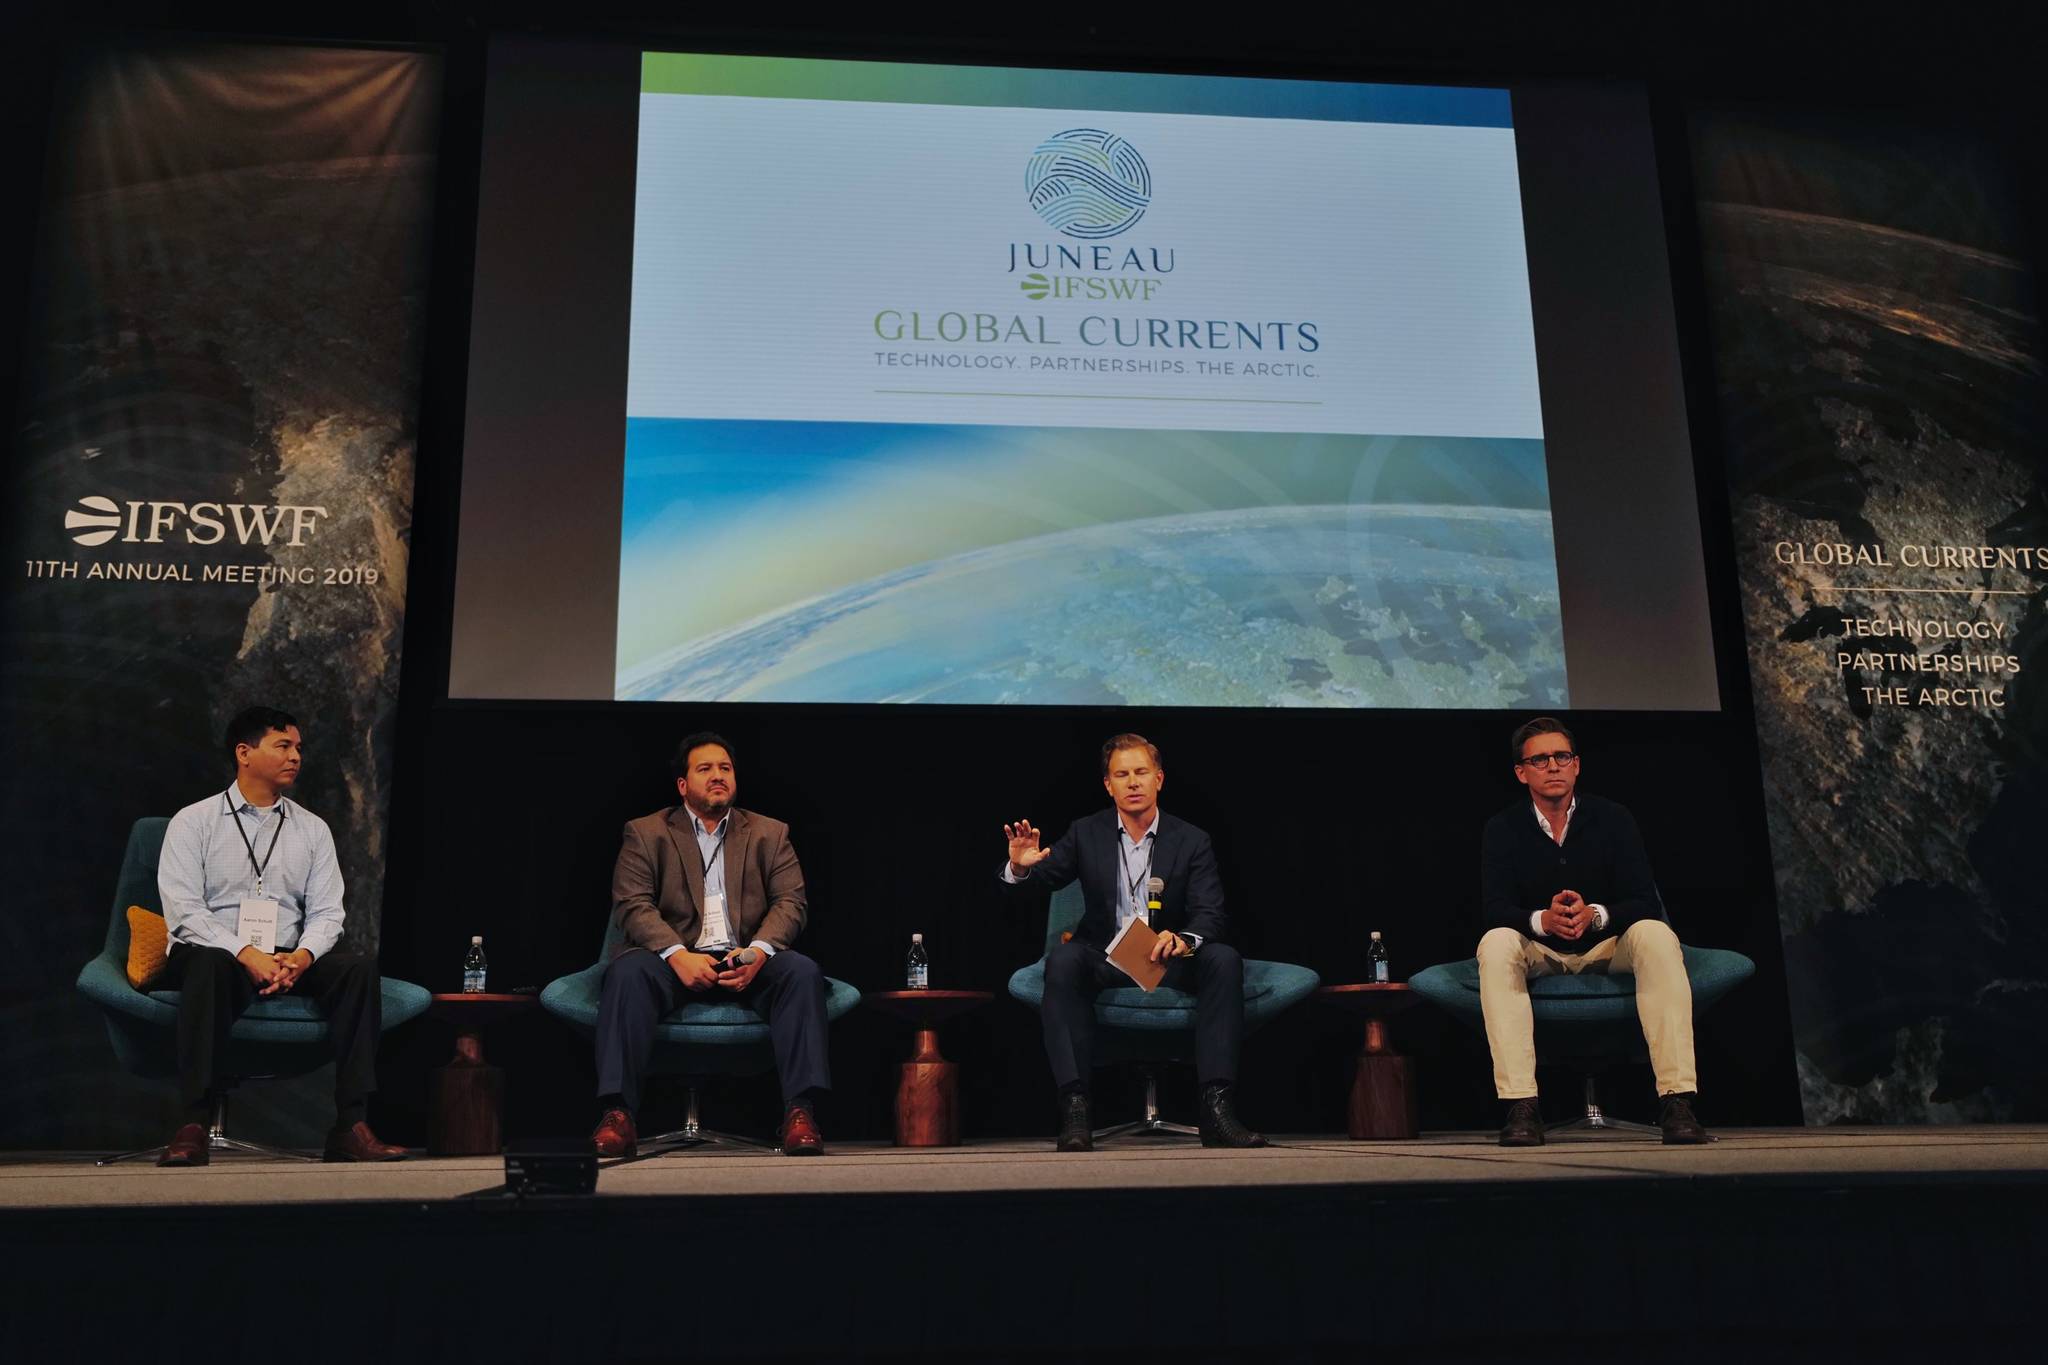 Erik Bethel, U.S. Director of the World Bank, second from right, moderates a panel on the Future of the Arctic with Aaron Schutt, President and CEO of Doyon Limit, left, Damian Bilbao, Vice President of Commercial Ventures for BP Alaska, center and Nils Bolmstrand, CEO of Nordea Asset Management, during the annual meeting of the International Forum of Sovereign Wealth Funds at Centennial Hall on Thursday, Sept. 12, 2019. (Michael Penn | Juneau Empire)